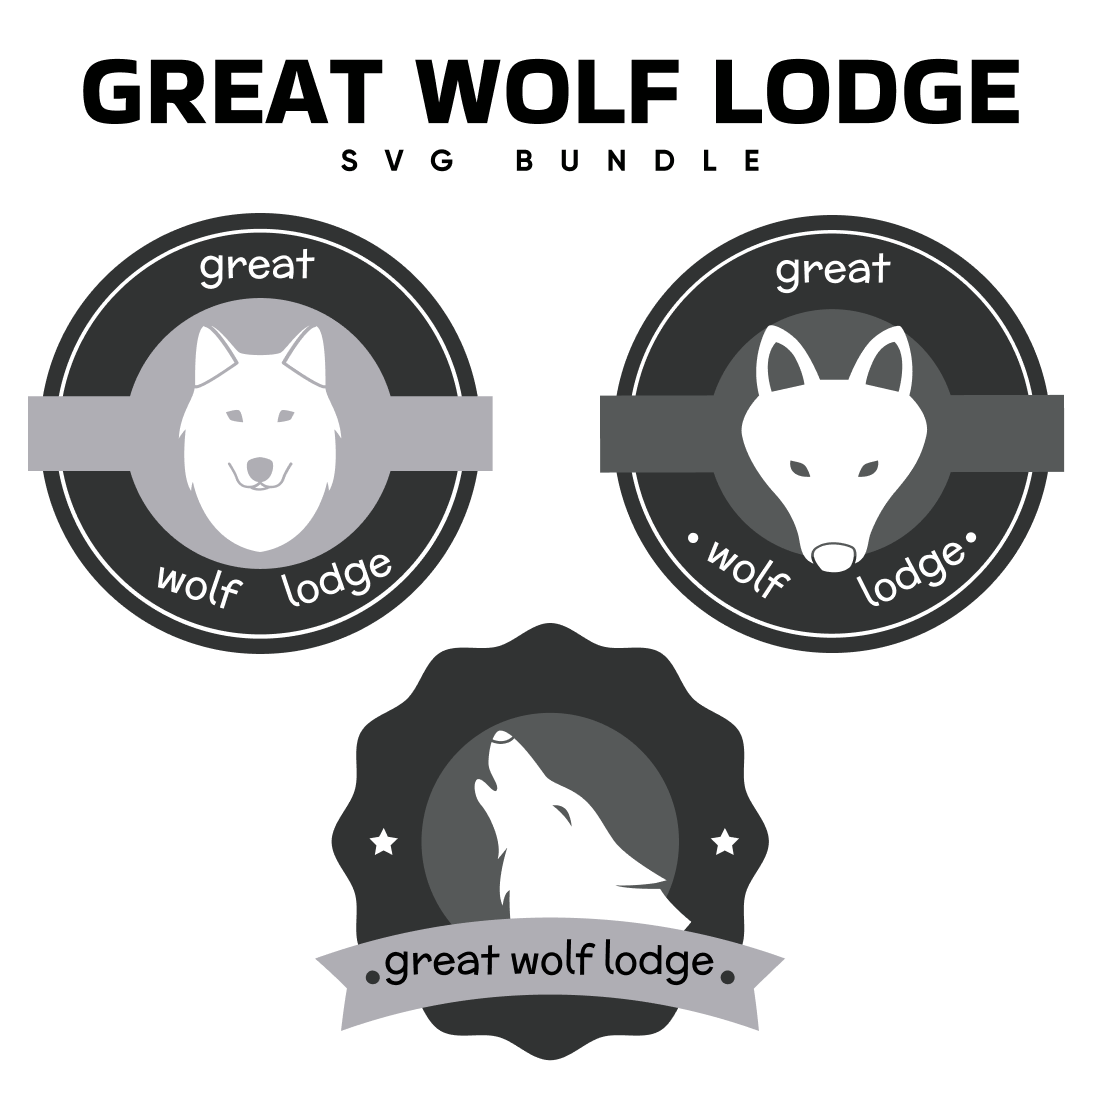 The great wolf lodge svg bundle.